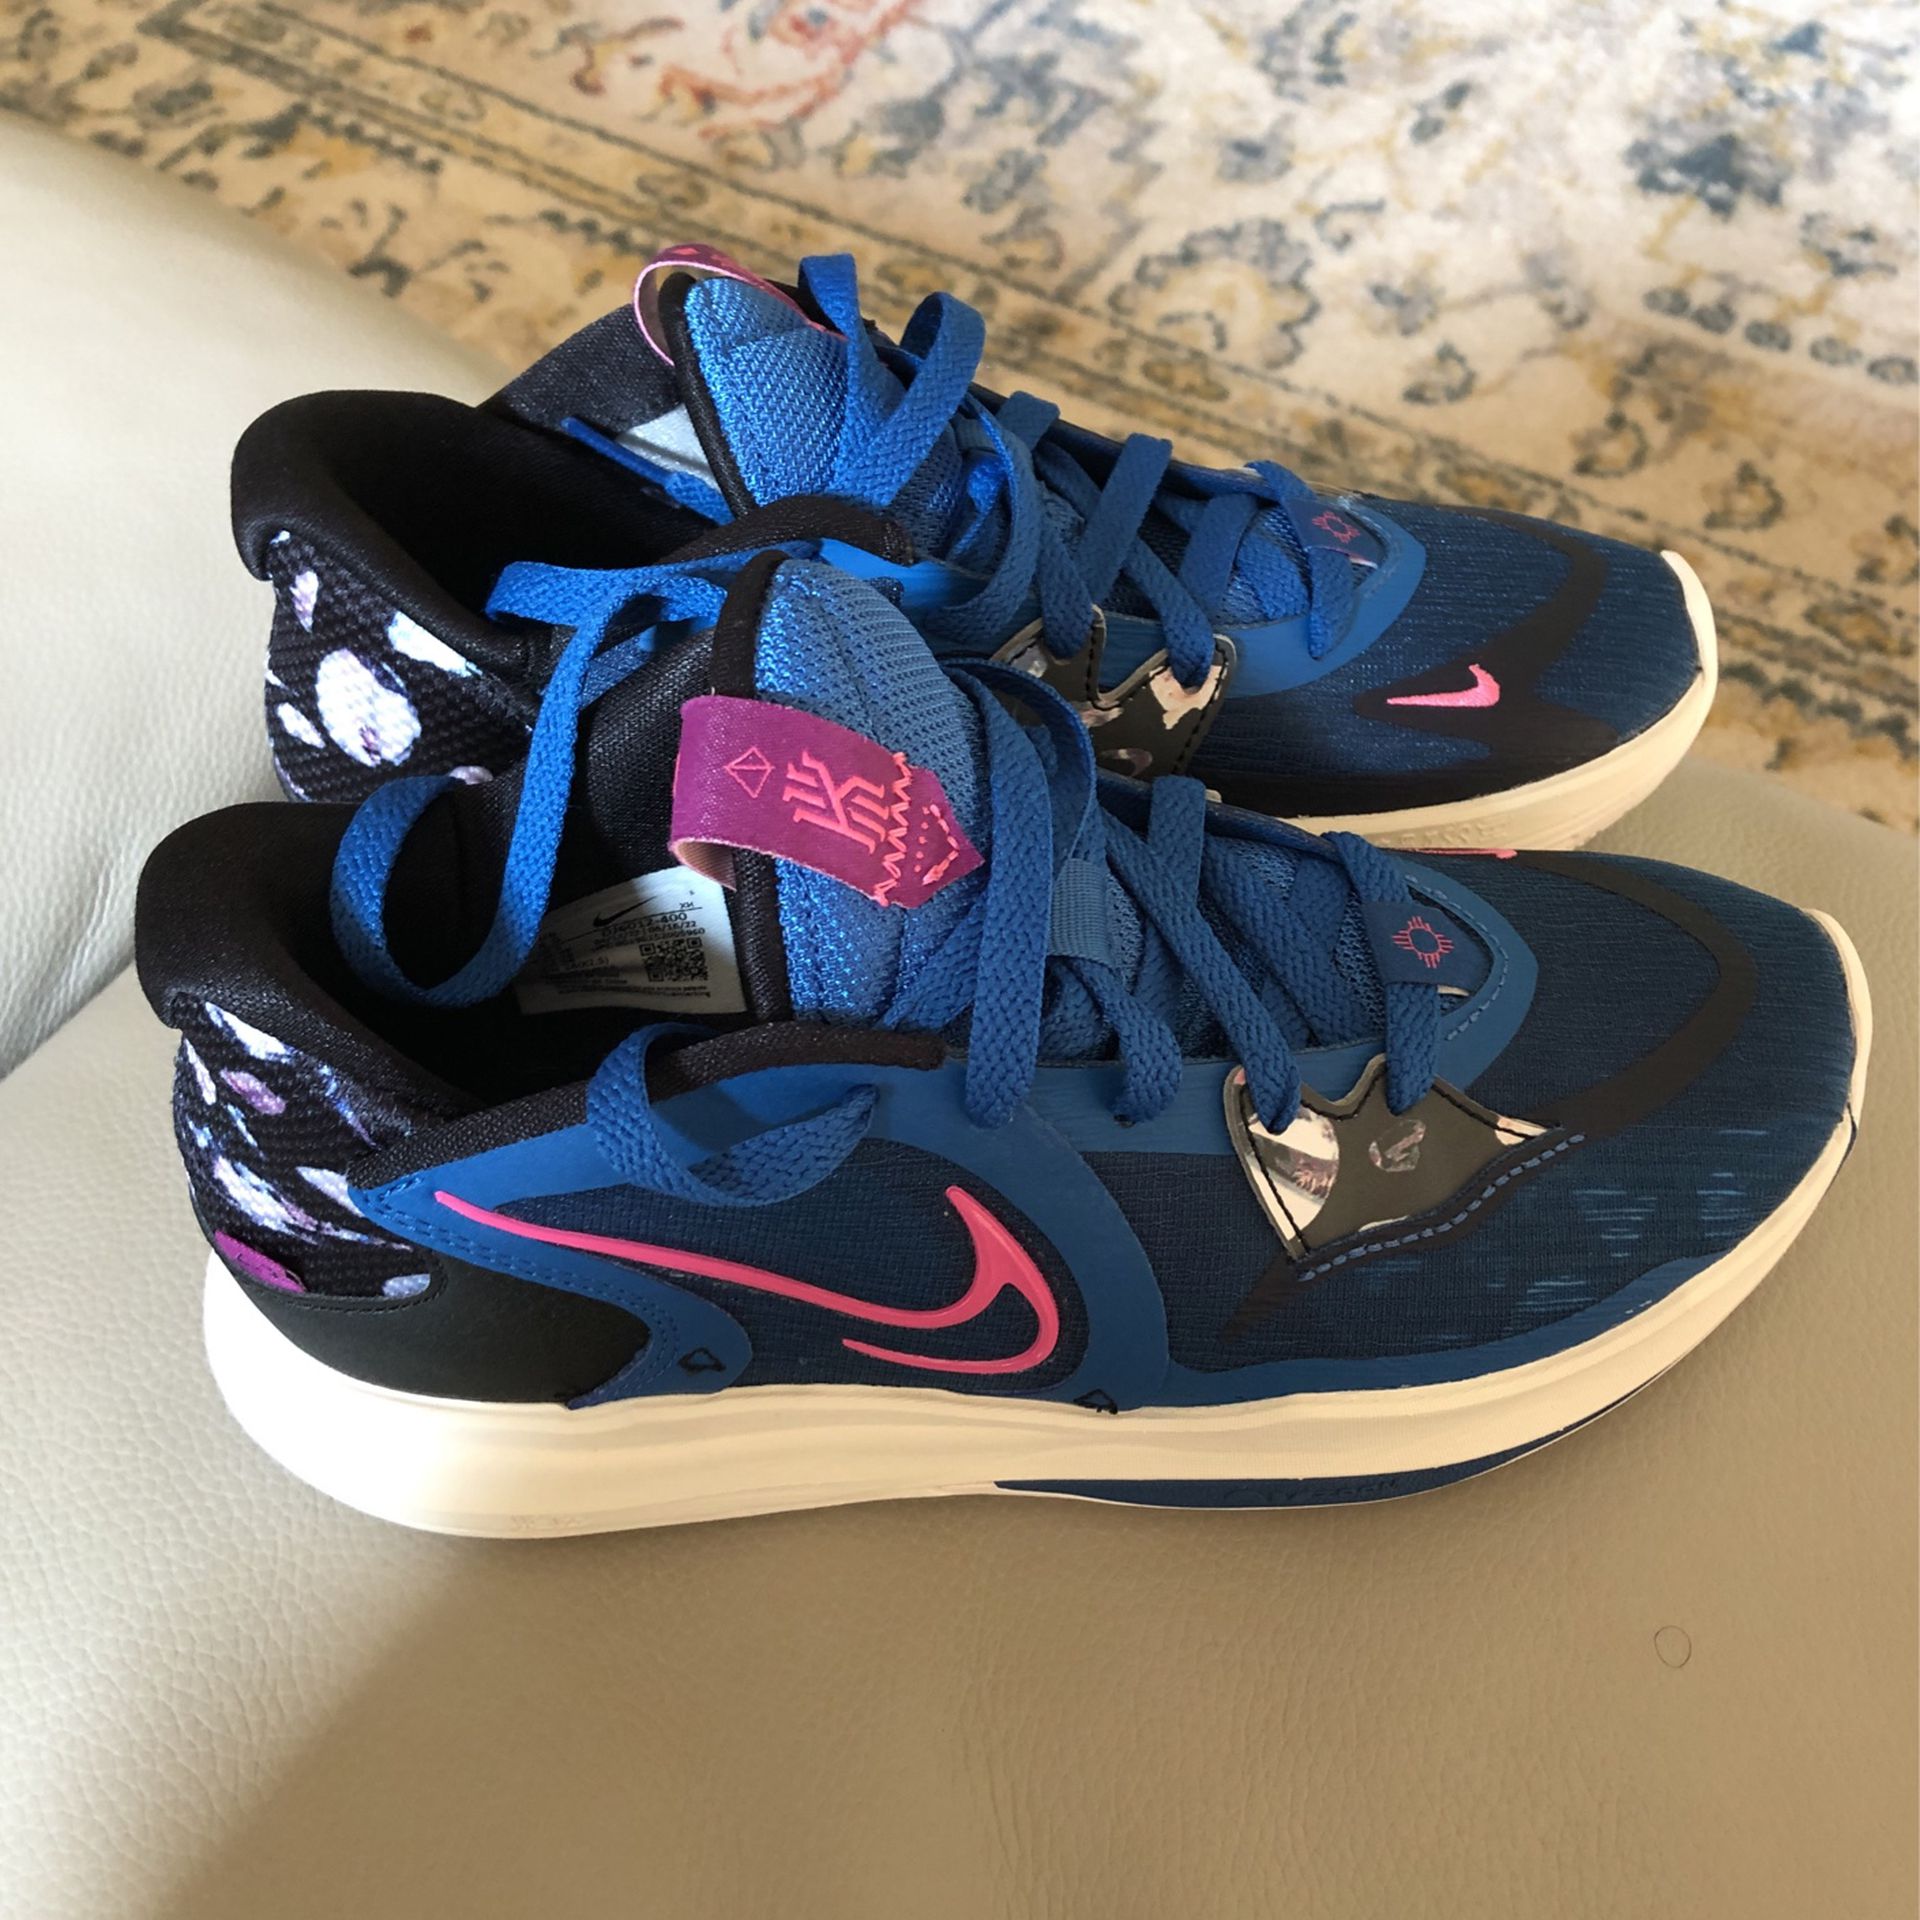 Gucci Shoes for Sale in Baltimore, MD - OfferUp